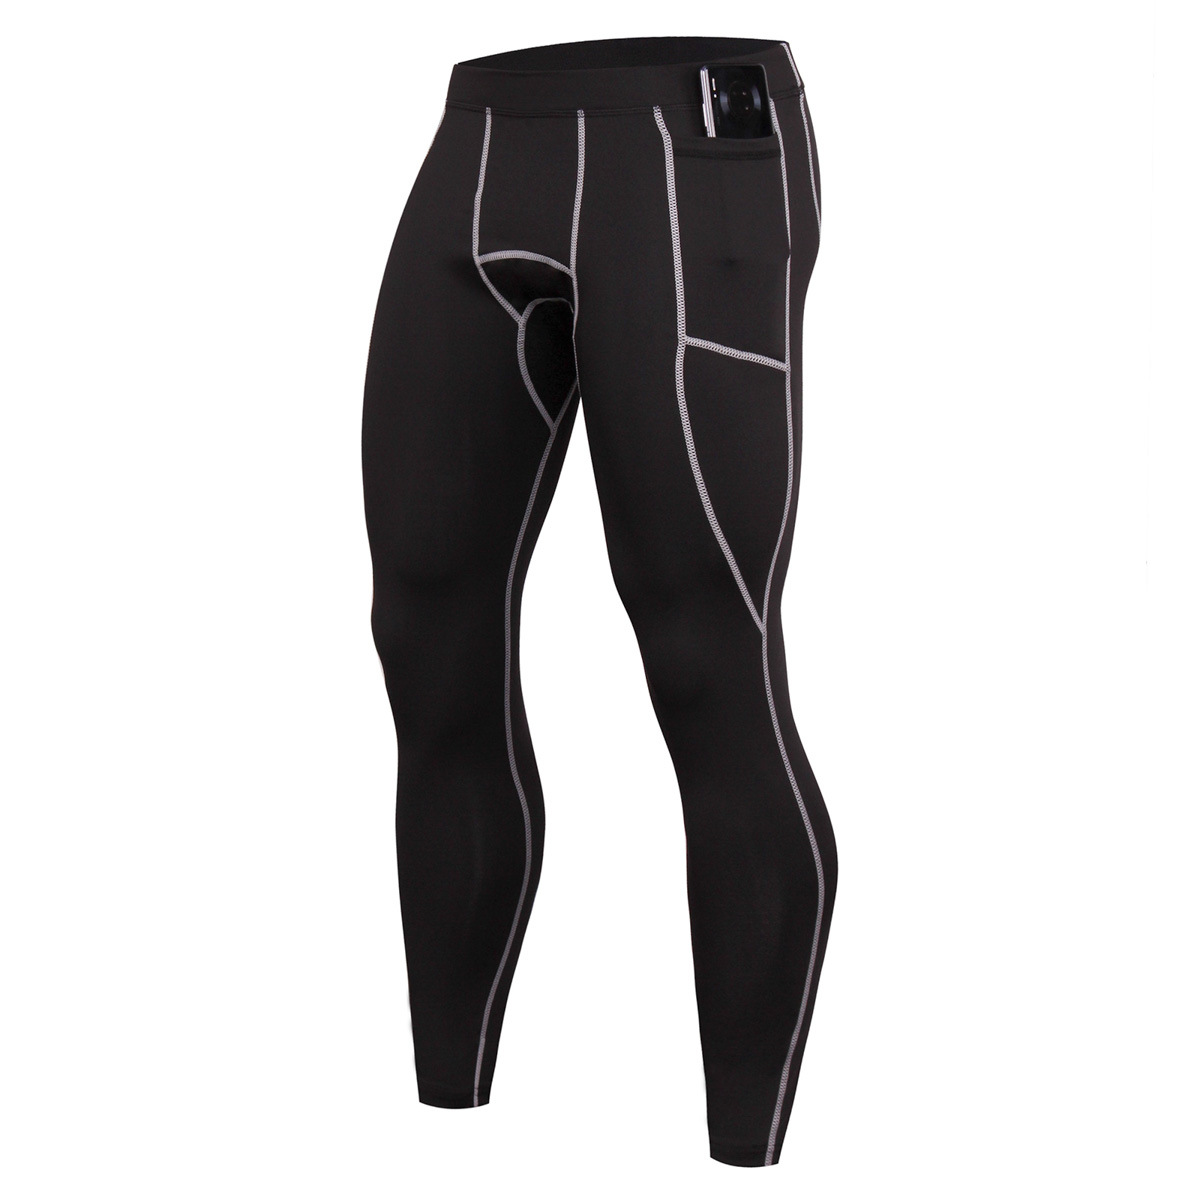 Men Breathable Quick-drying Phone Pocket Sports Tights